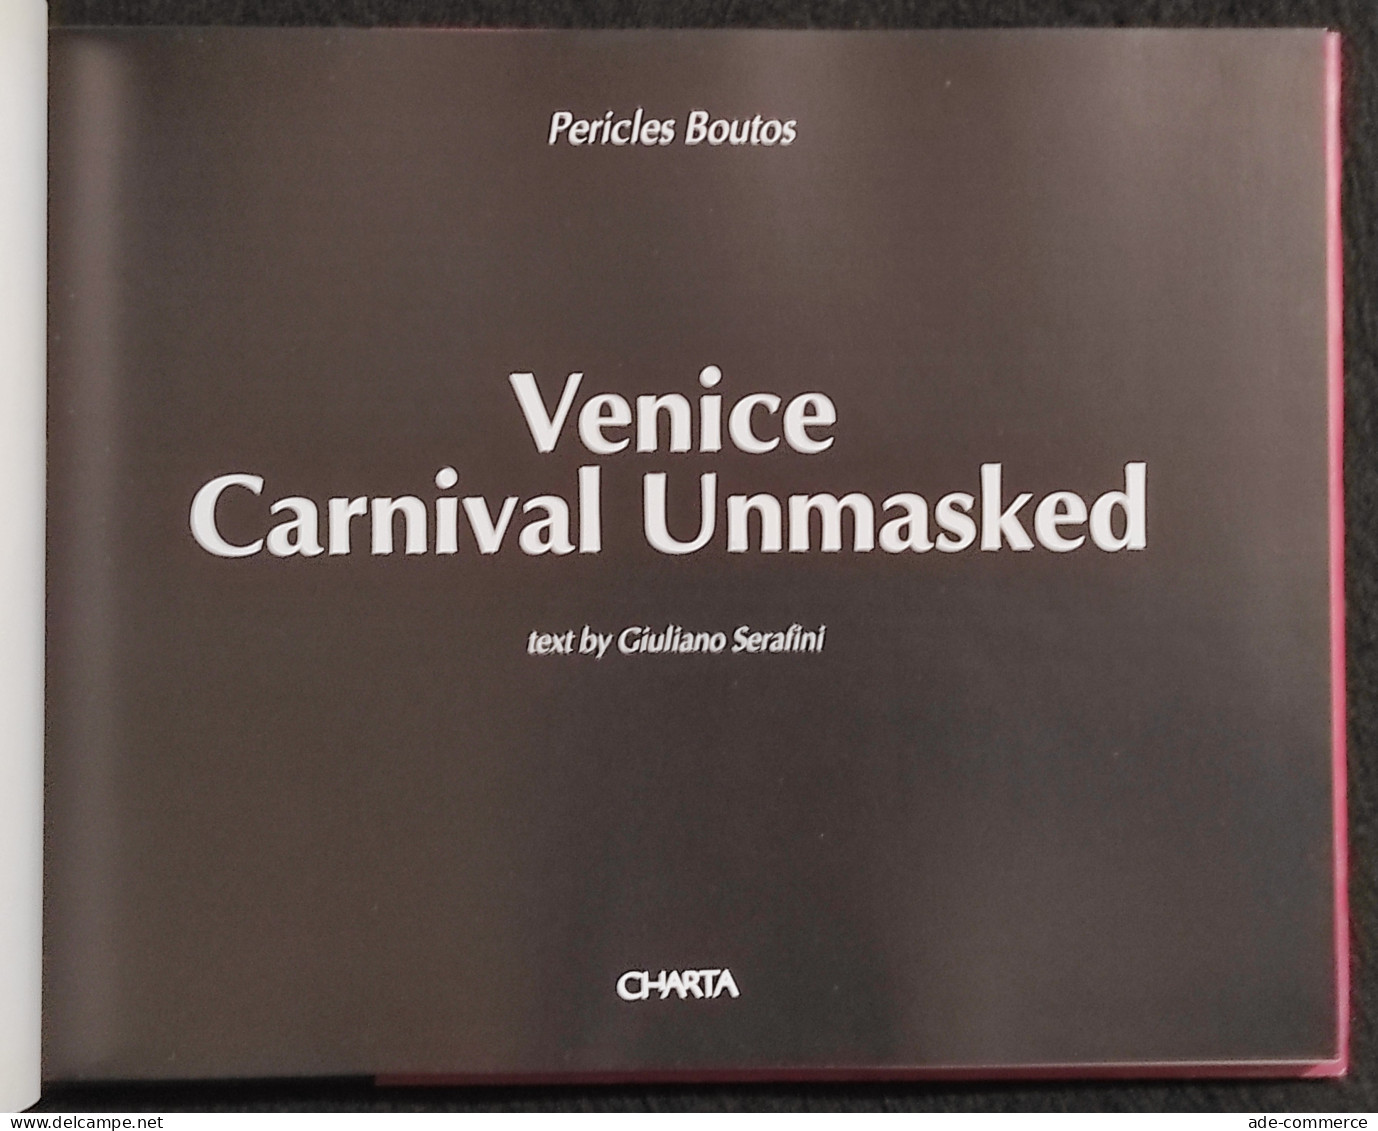 Venice-Carnival Unmasked - Pericles Boutos - Charta - 1998 - Pictures